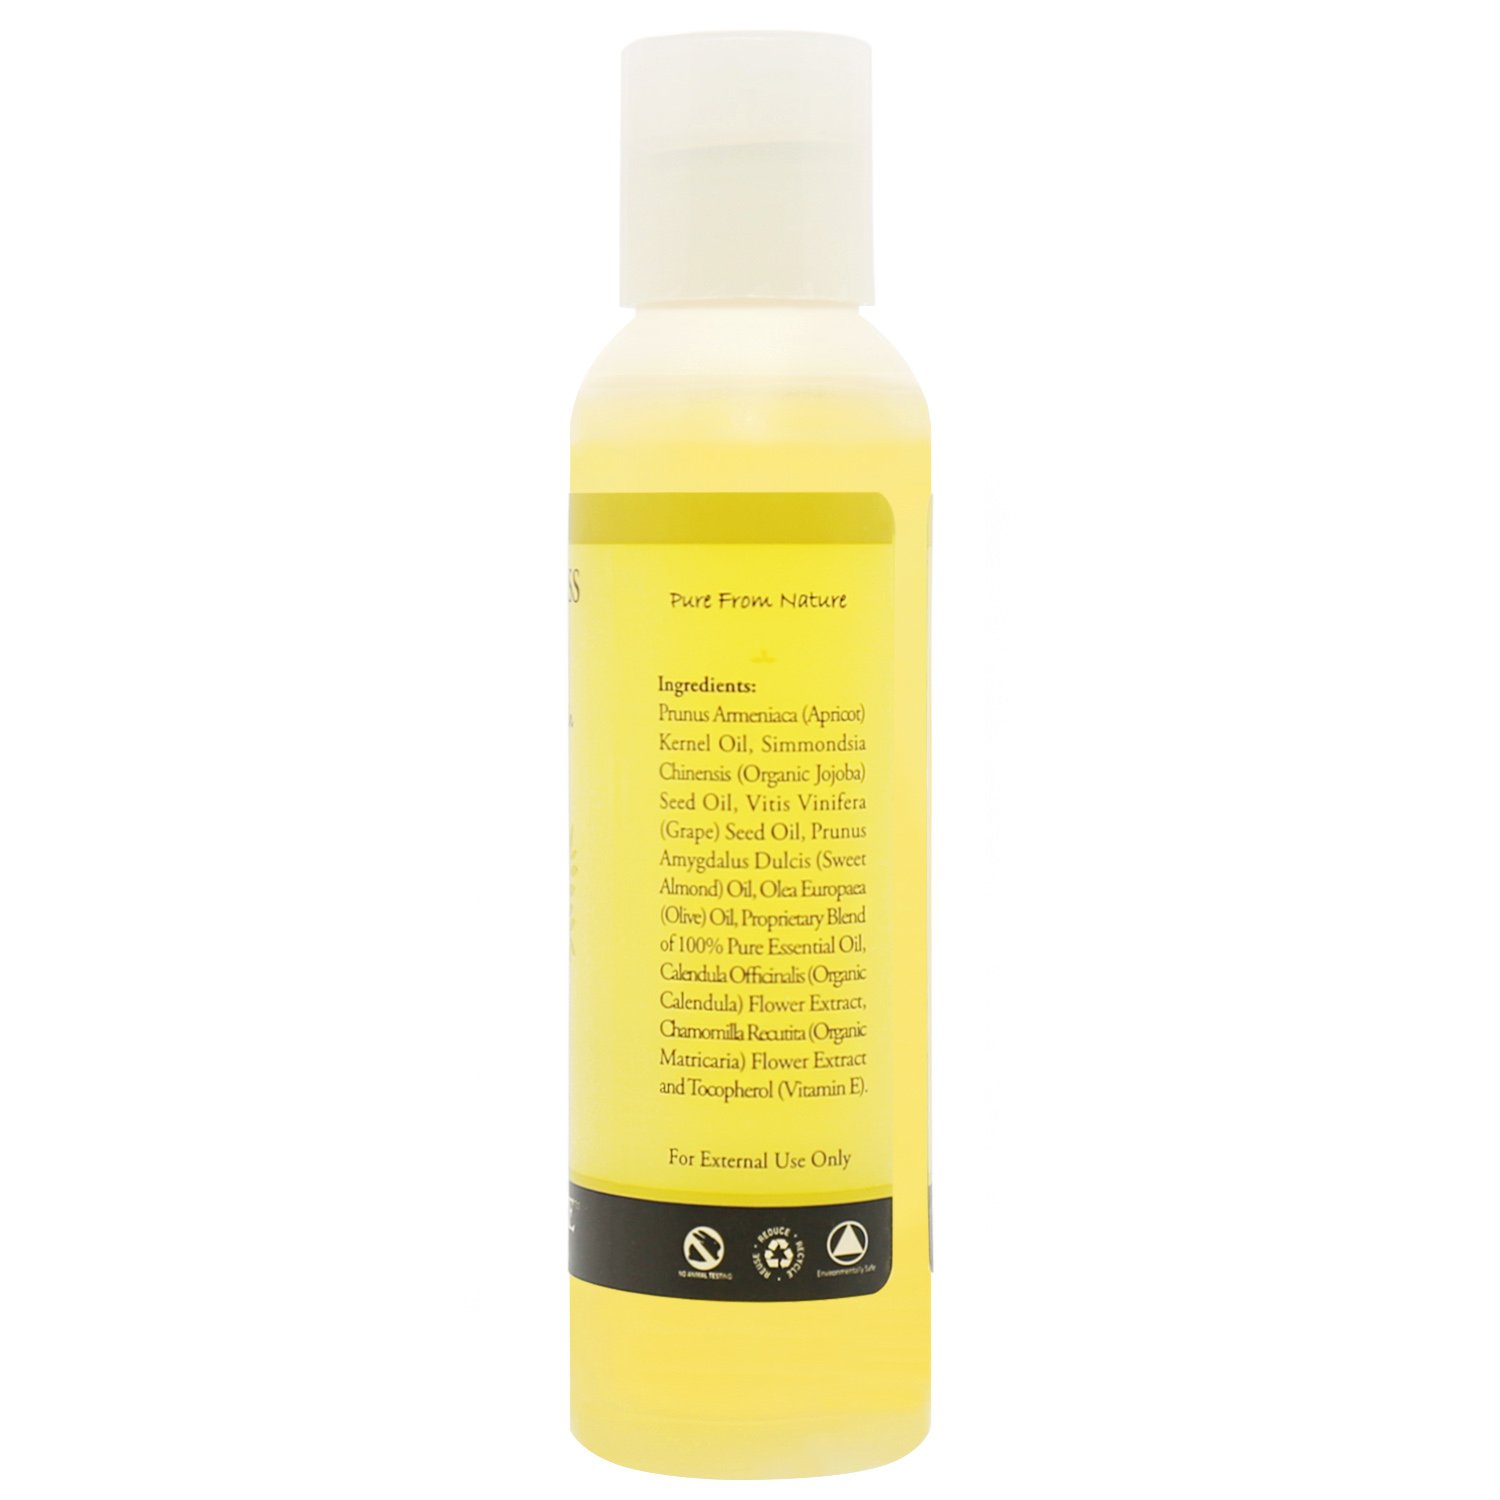 Plantlife Lemongrass Body Oil - Formulated for Soft and Silky Skin Using Rich Plant Oils That Absorb and Leave a Light Aroma on the Skin - Made in California 4 oz